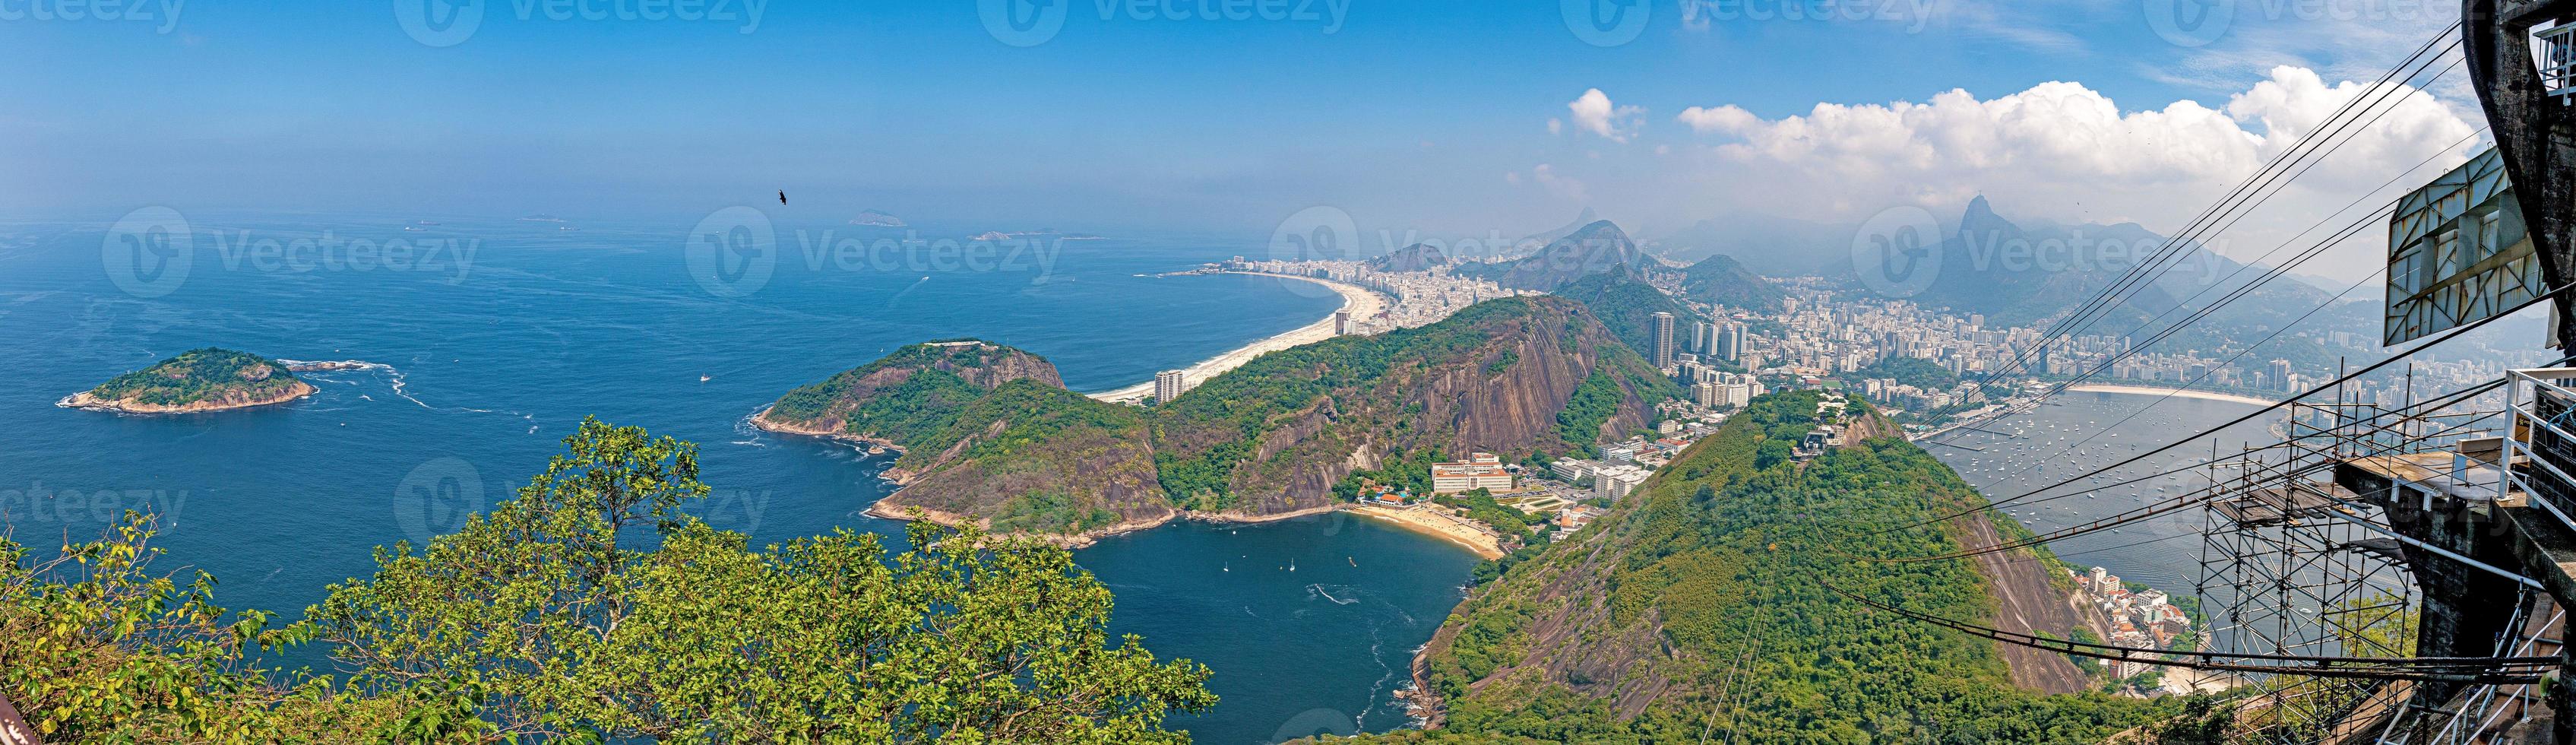 Panoramic view of the city and beaches from the observation deck on Sugarloaf Mountain in Rio de Janeiro photo